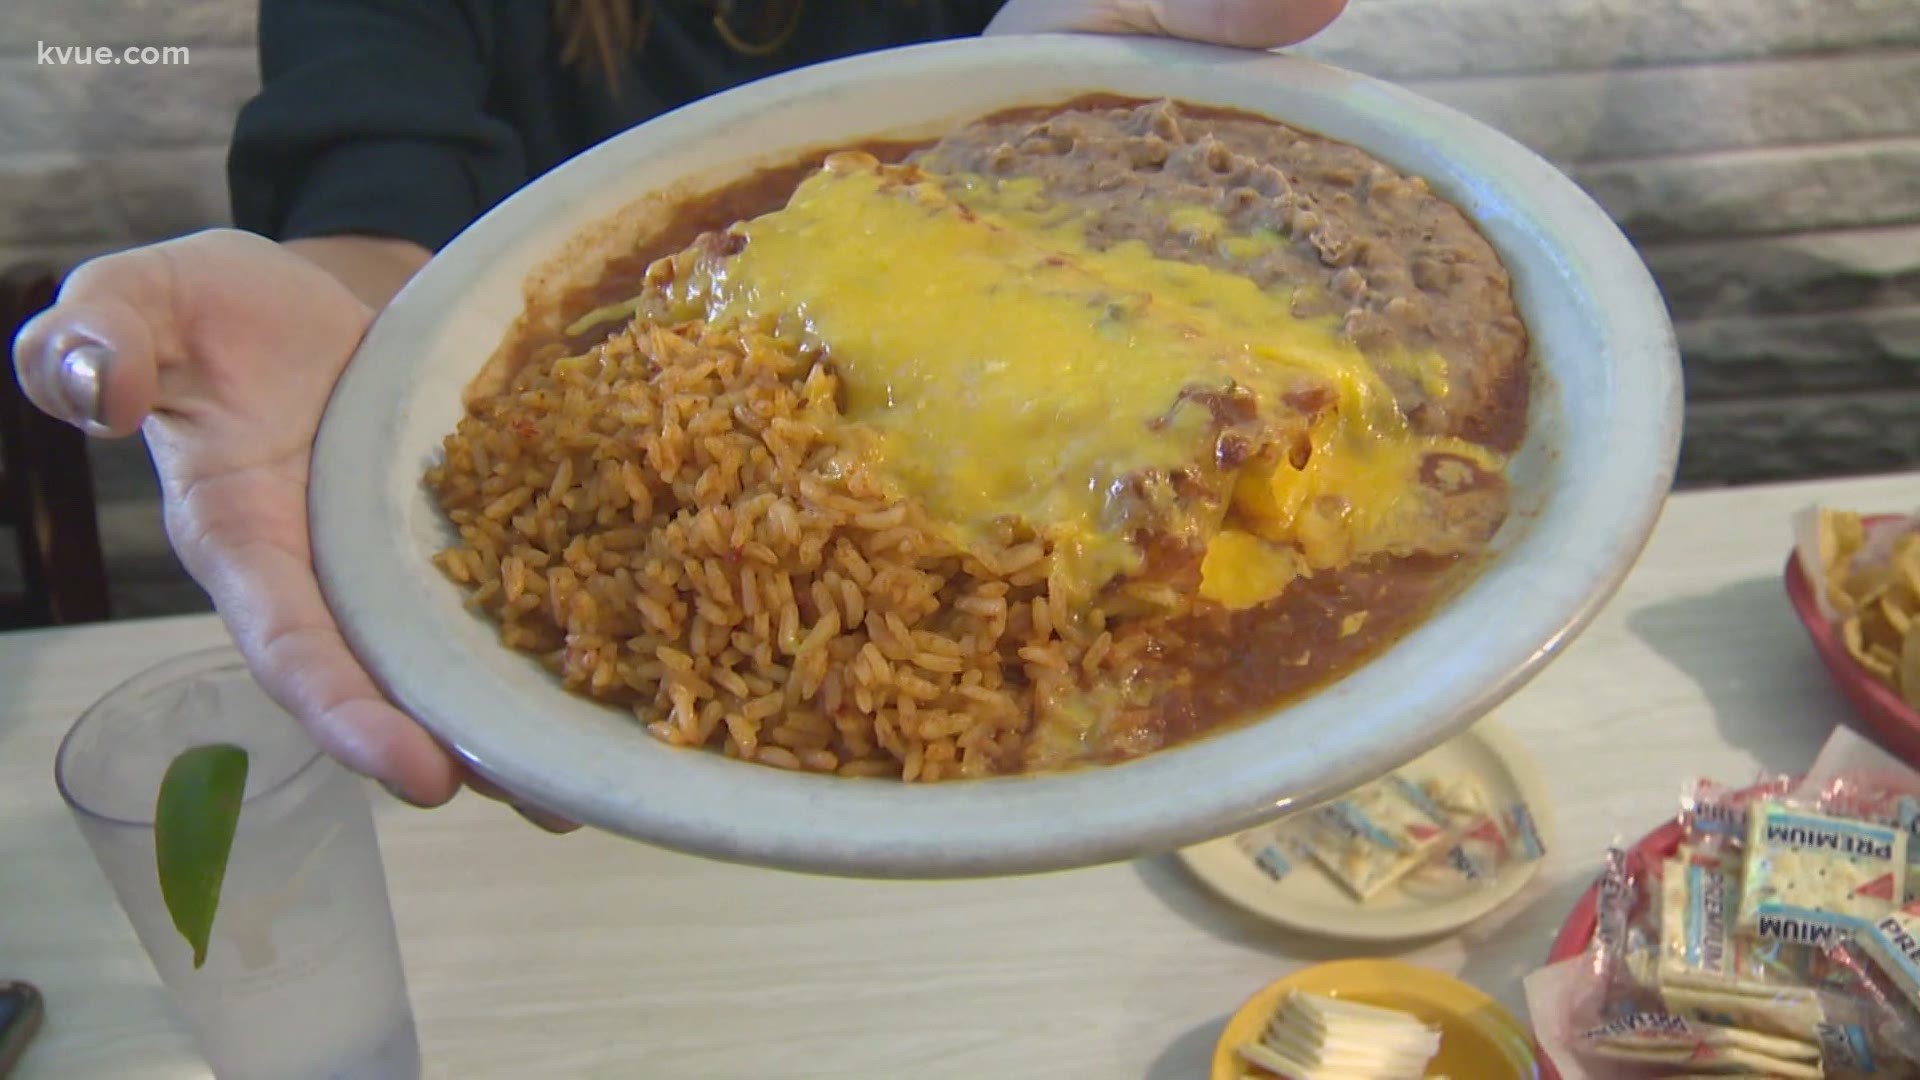 For this installment of KVUE's Keep Austin Local series, Brittany Flowers stopped by a long-time local eatery.